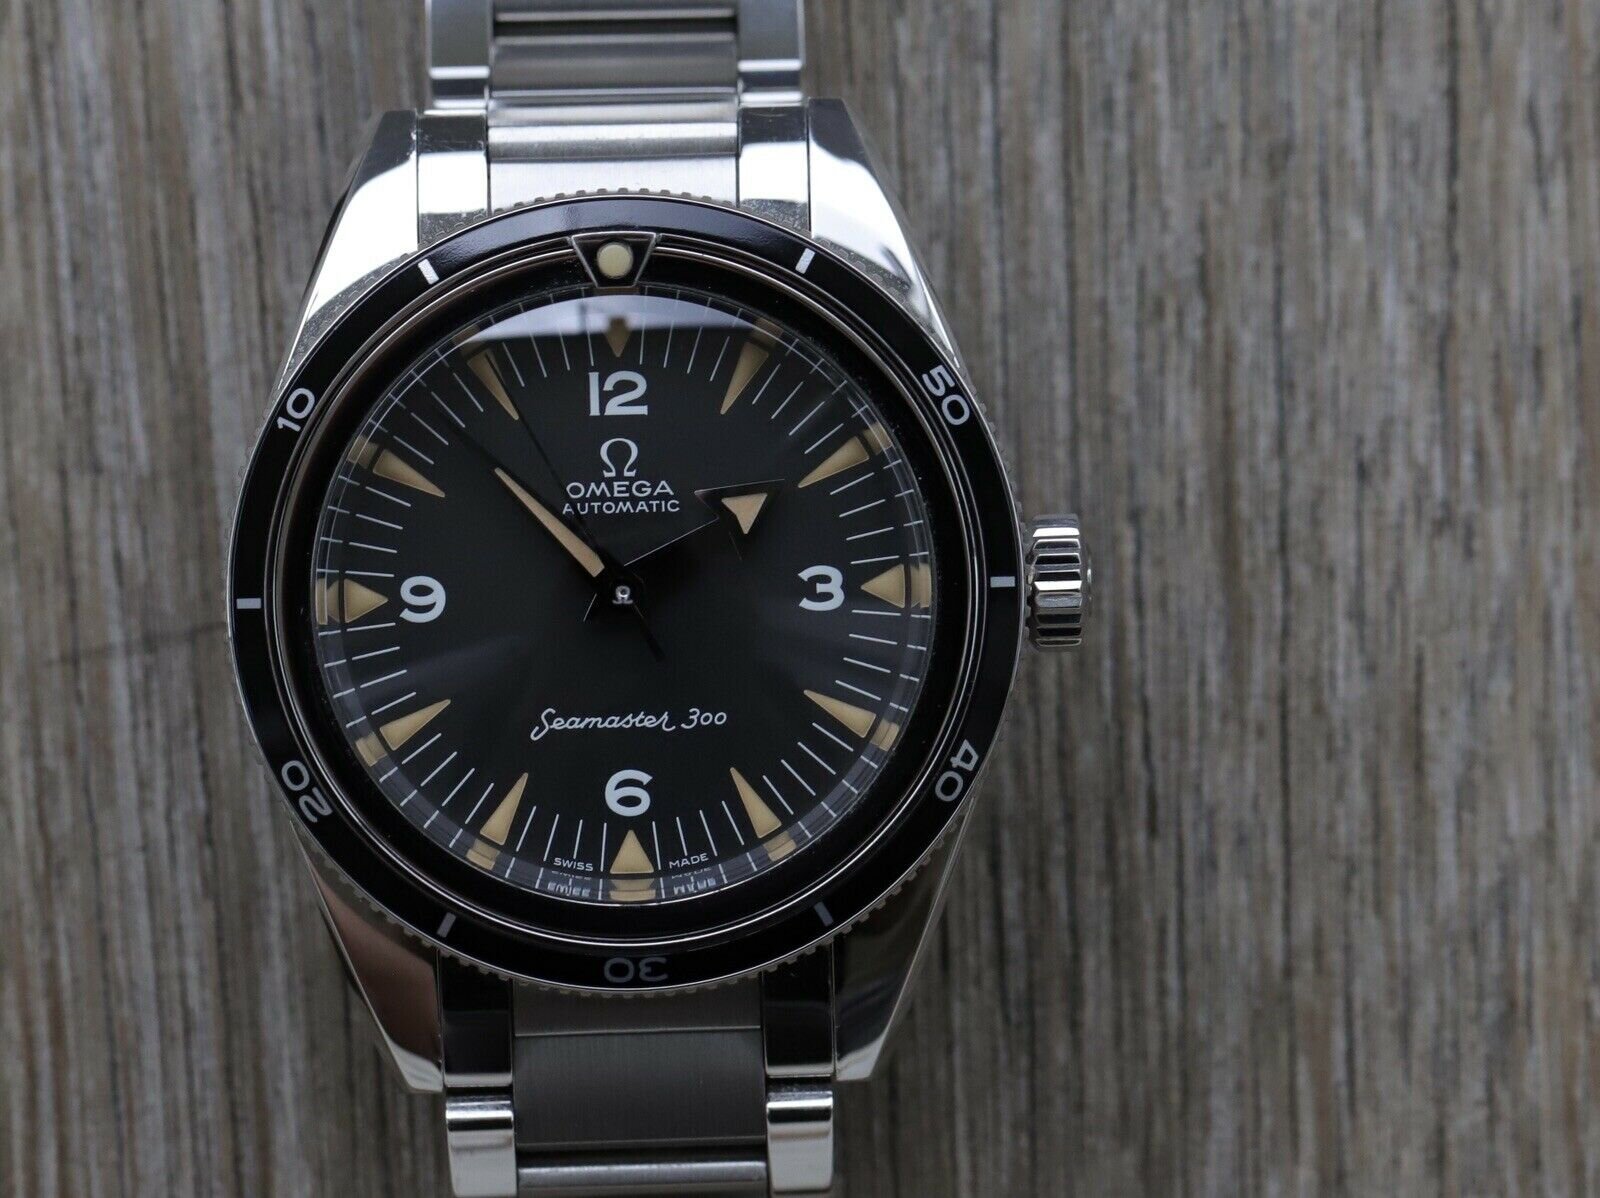 Omega_Seamaster_300_E2_80_98The_1957_Trilogy_E2_80_99_Limited_Edition_234.10.39.20.01.001_-_20_Watch_Vault_02.jpg